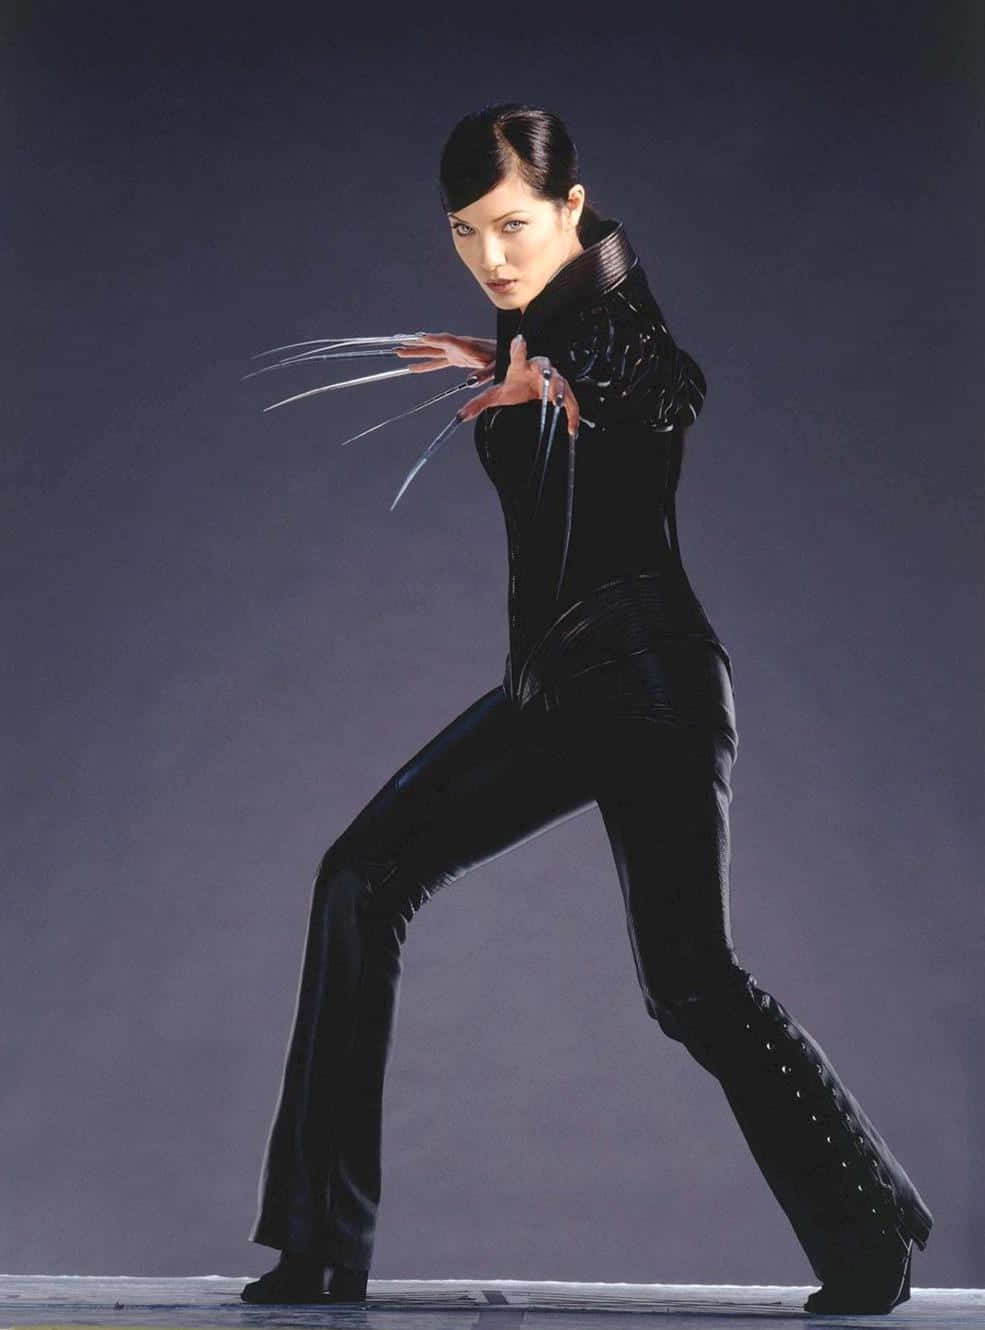 Lady Deathstrike in her iconic pose Wallpaper